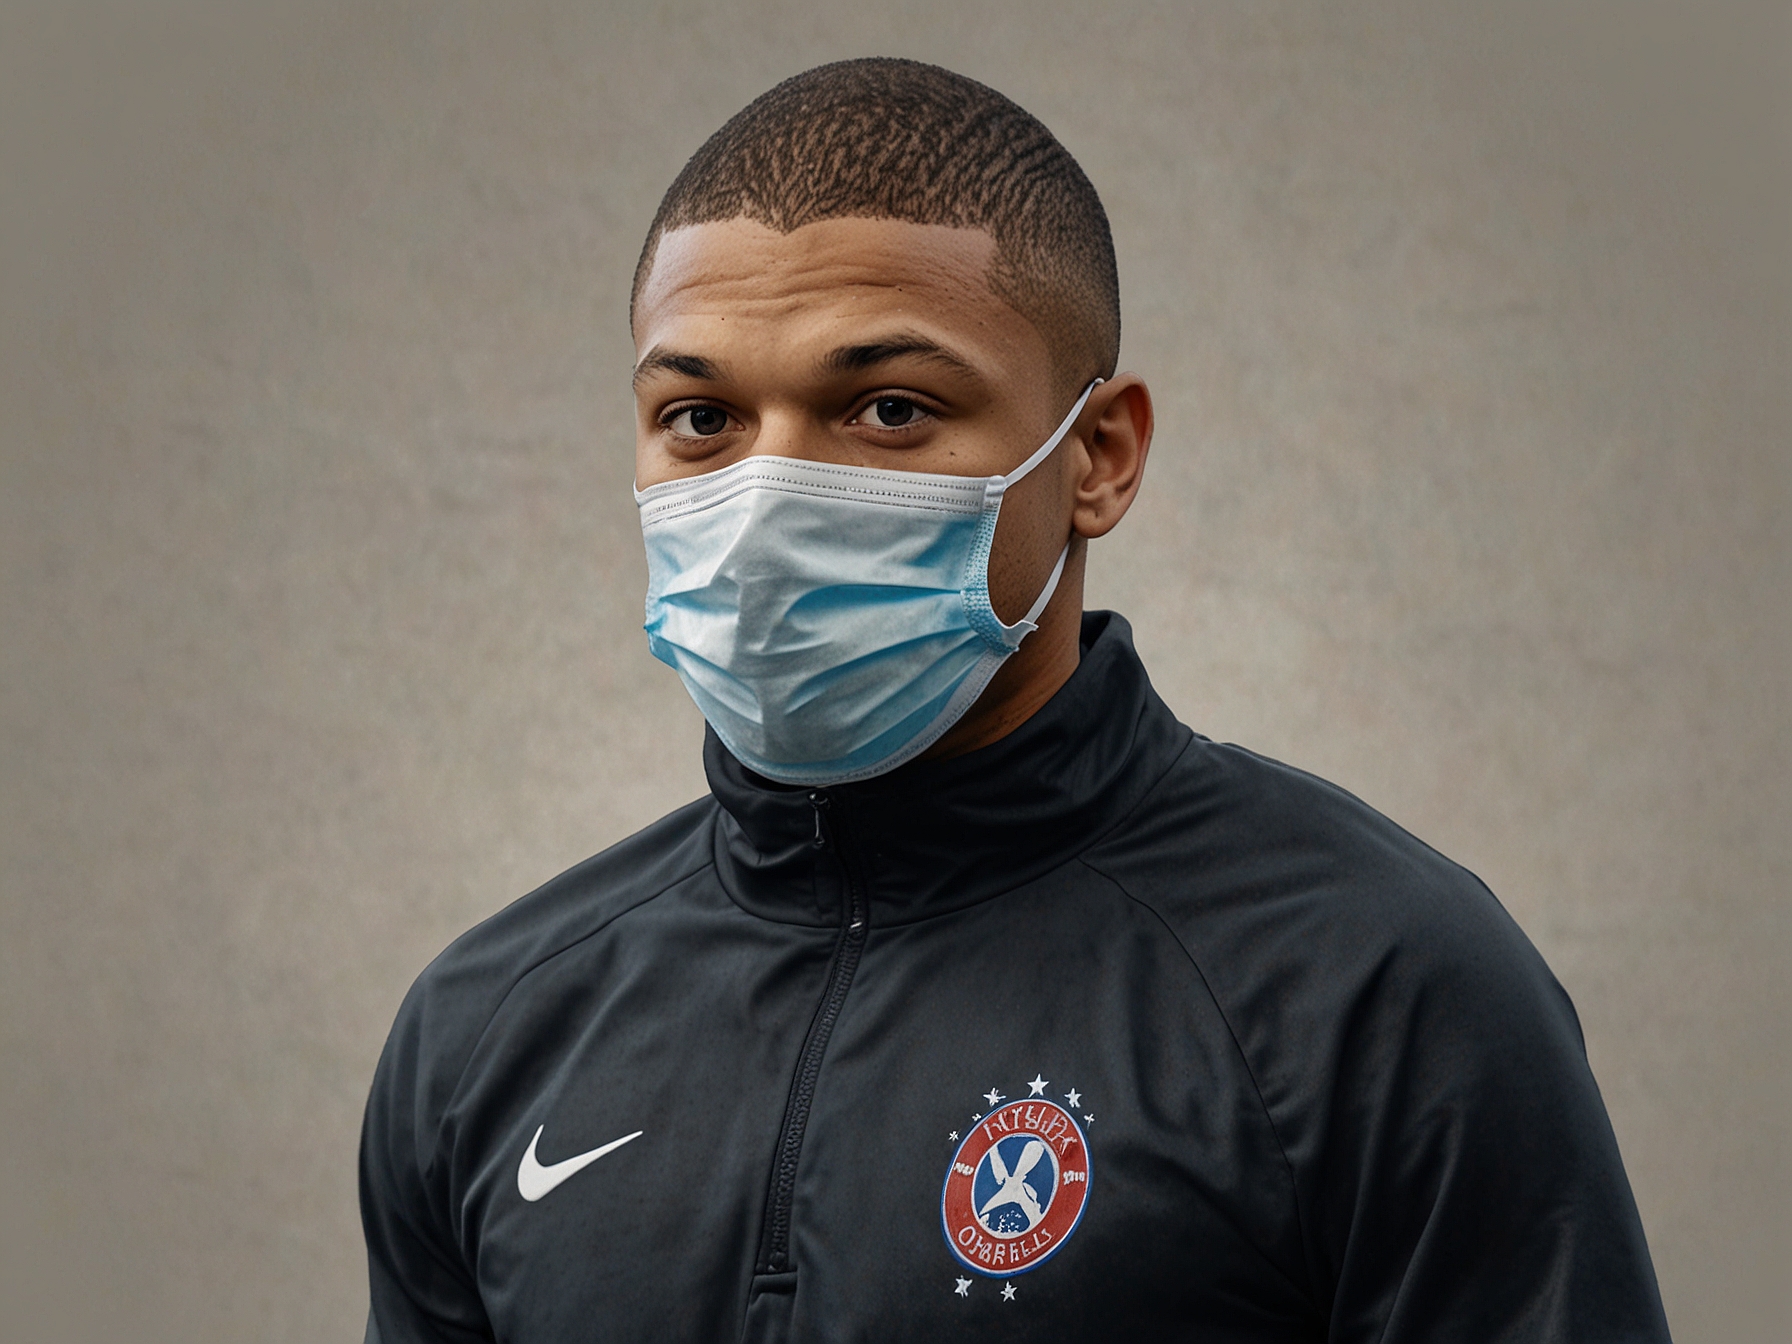 Kylian Mbappe, wearing his new protective mask, is seen intensely focused during a training session, showcasing his agility and determination to return to top form for the Euro 2024 match against Poland.